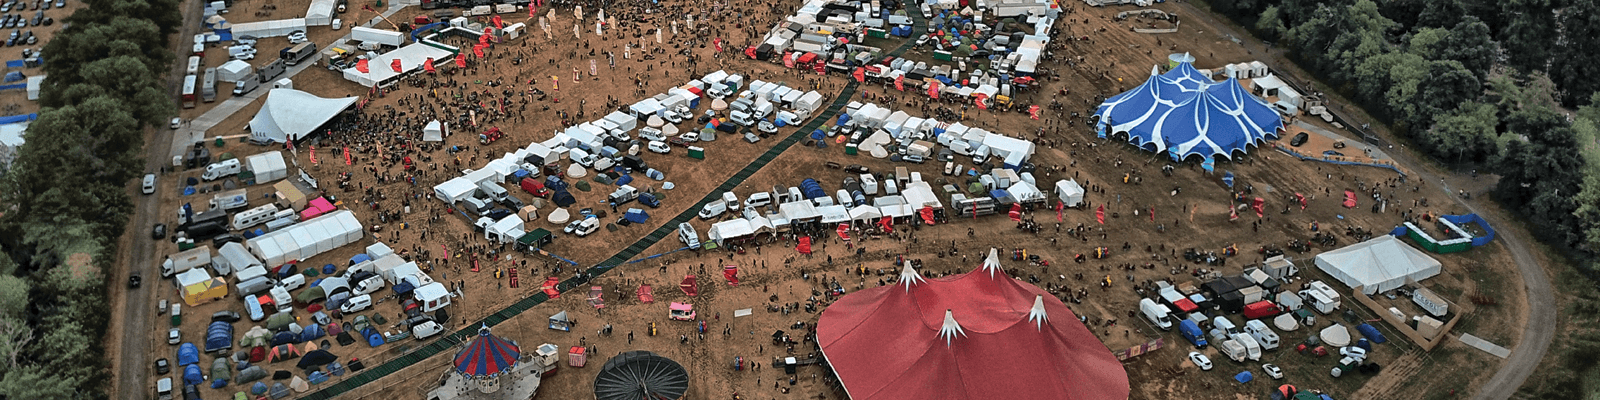 A large fair with marquees in a field